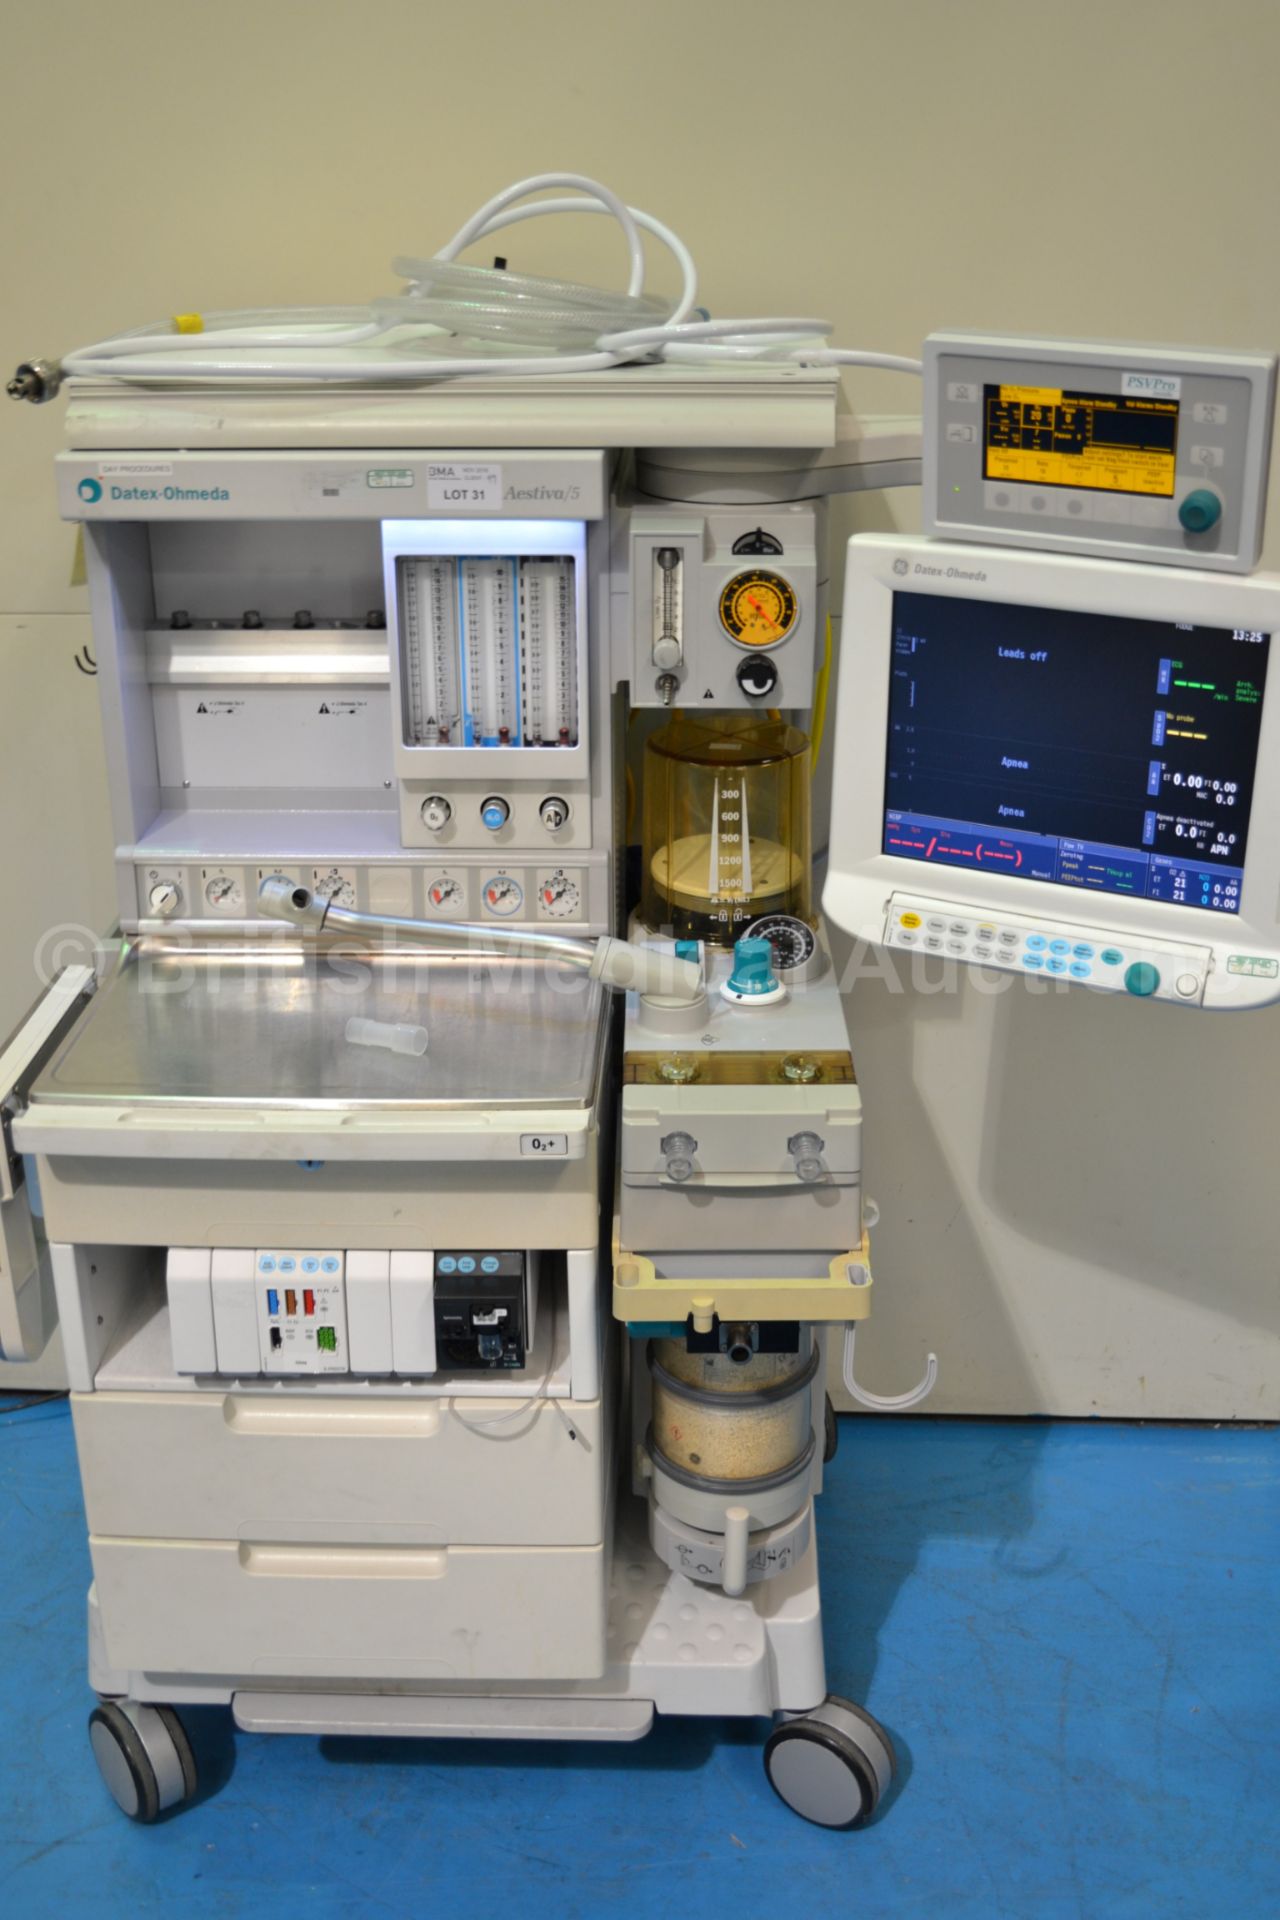 Datex Ohmeda Aestiva/5 Anaesthesia System with Aes - Image 3 of 7